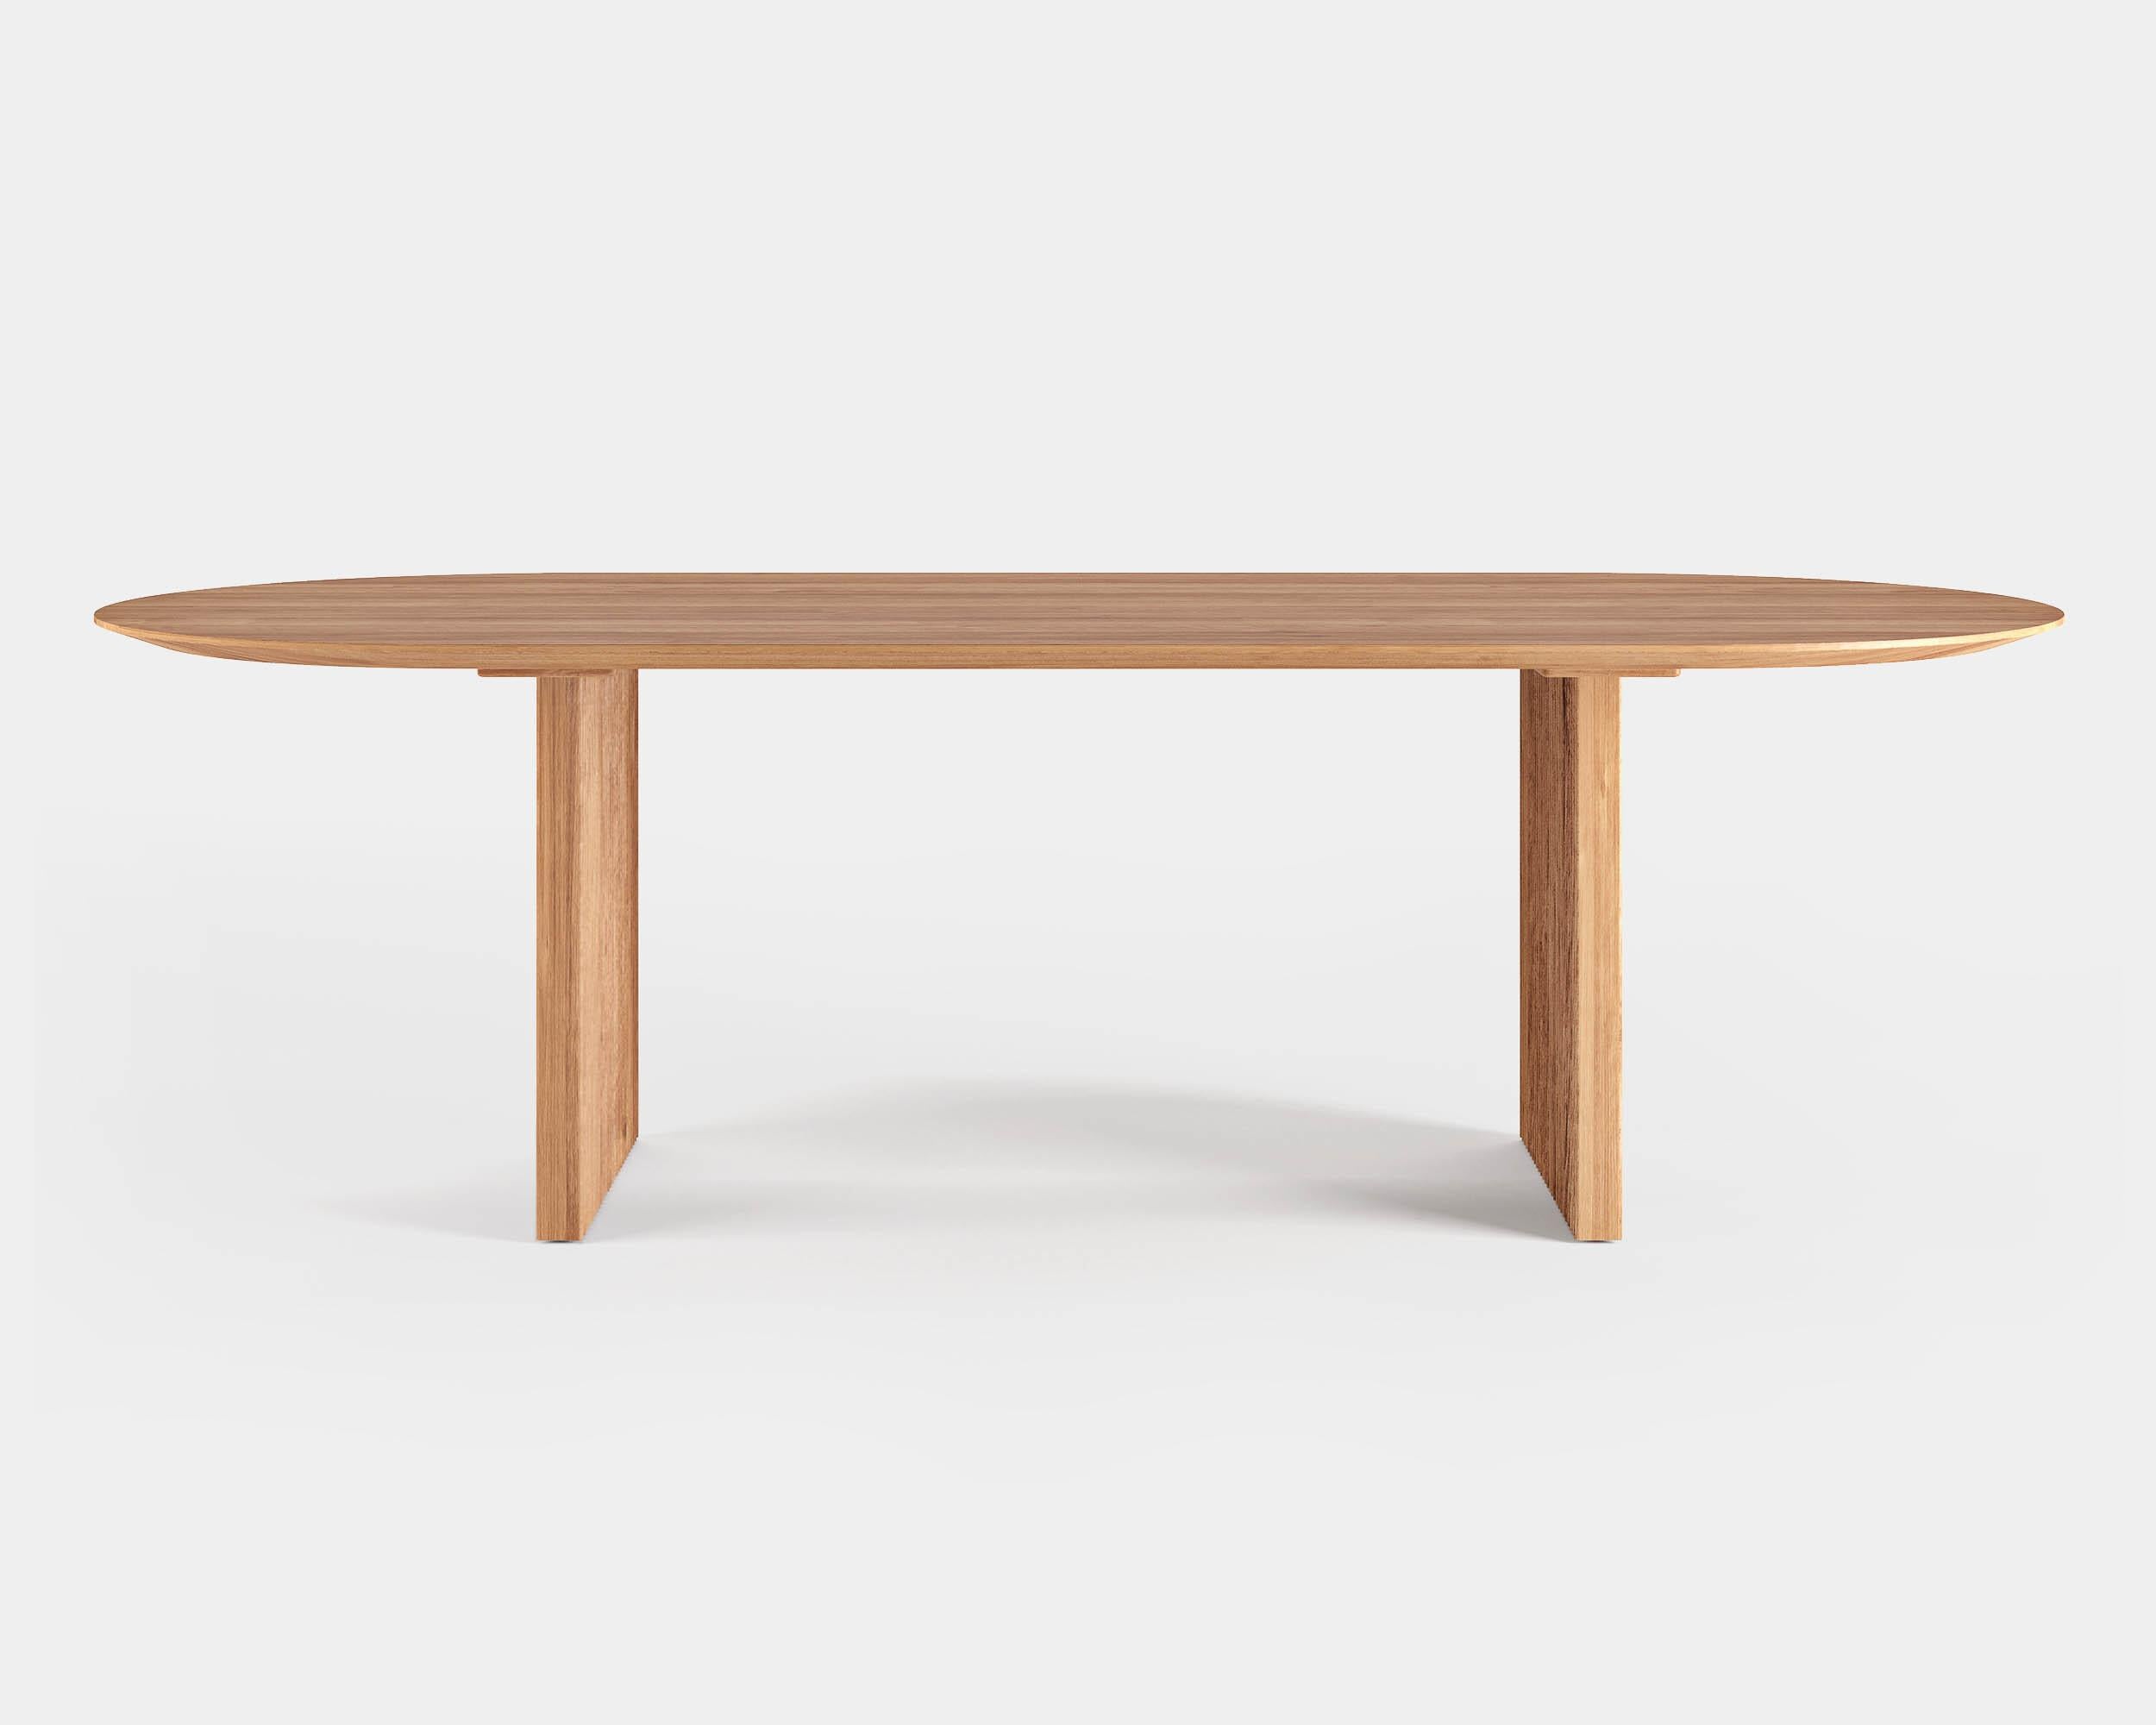 Ten dining table, oval, 200cm.
Solid wood tabletop and legs. Handmade in Denmark. 

Measure: height: 72 or 74 cm.

Tabletop dimensions:
– 200 x 95 cm
– 240 x 105 cm
– 270 x 105 cm
– 300 x 105 cm
– 340 x 105 cm
– 370 x 105 cm
– 400 x 105